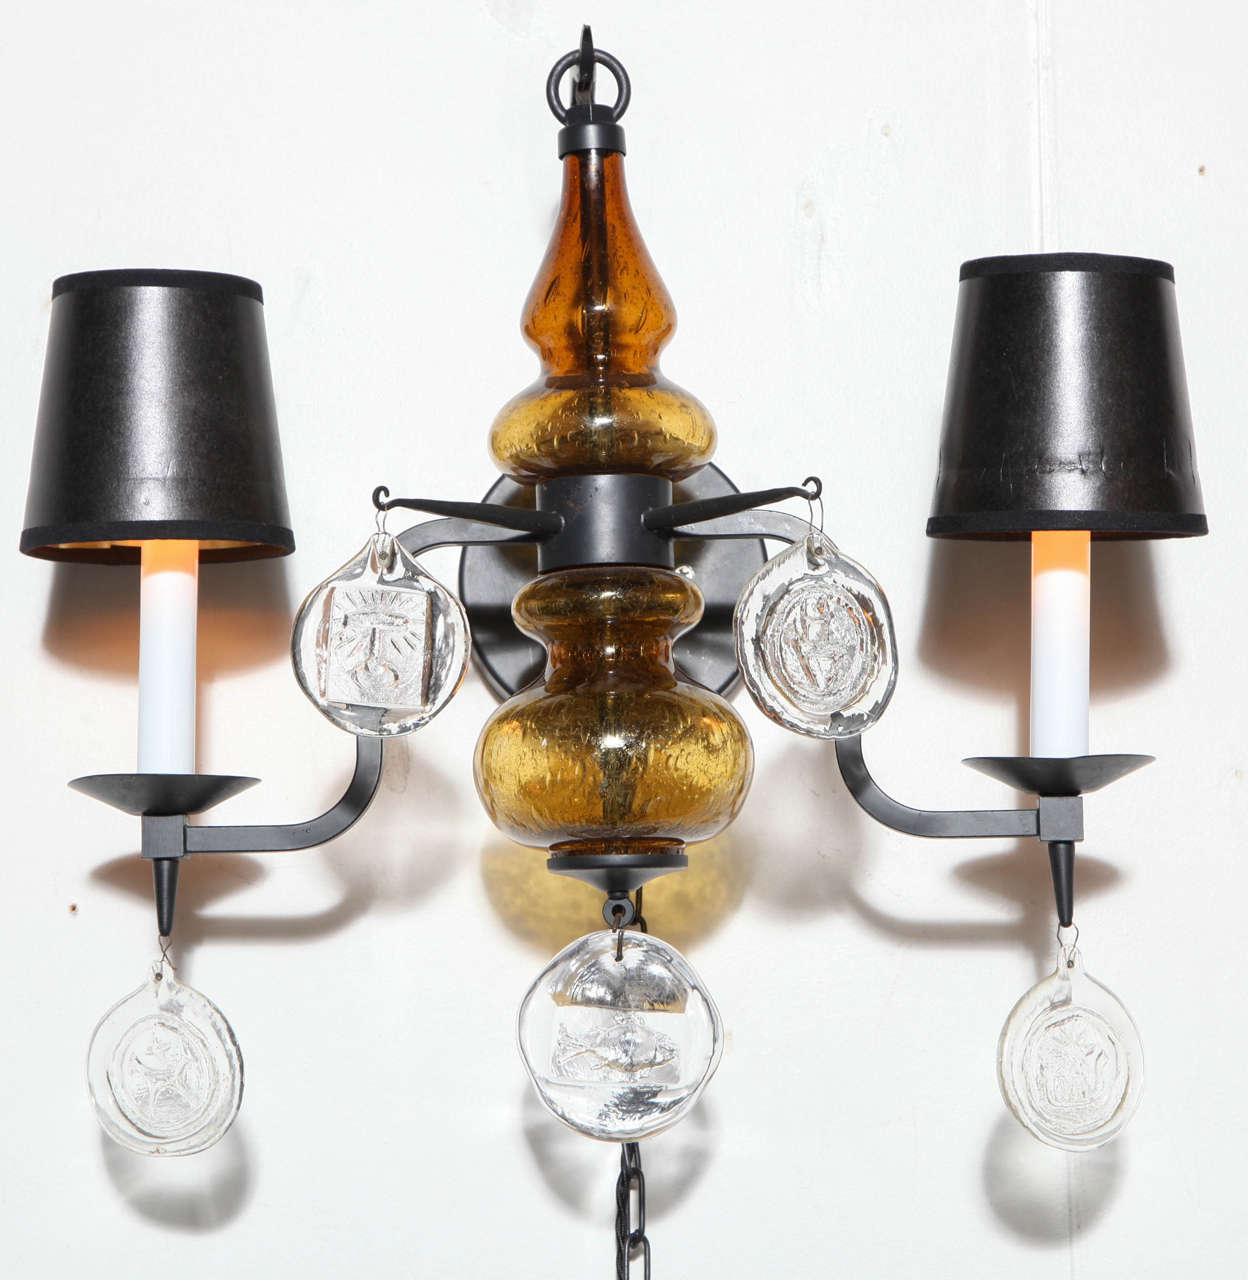 1950's Erik Hoglund Wall Lamp accentuated by Axel Stromberg Ironworks 2 Wrought Iron arms, Boda Nova Glasswork Amber Glass and 5 round hand crafted 3